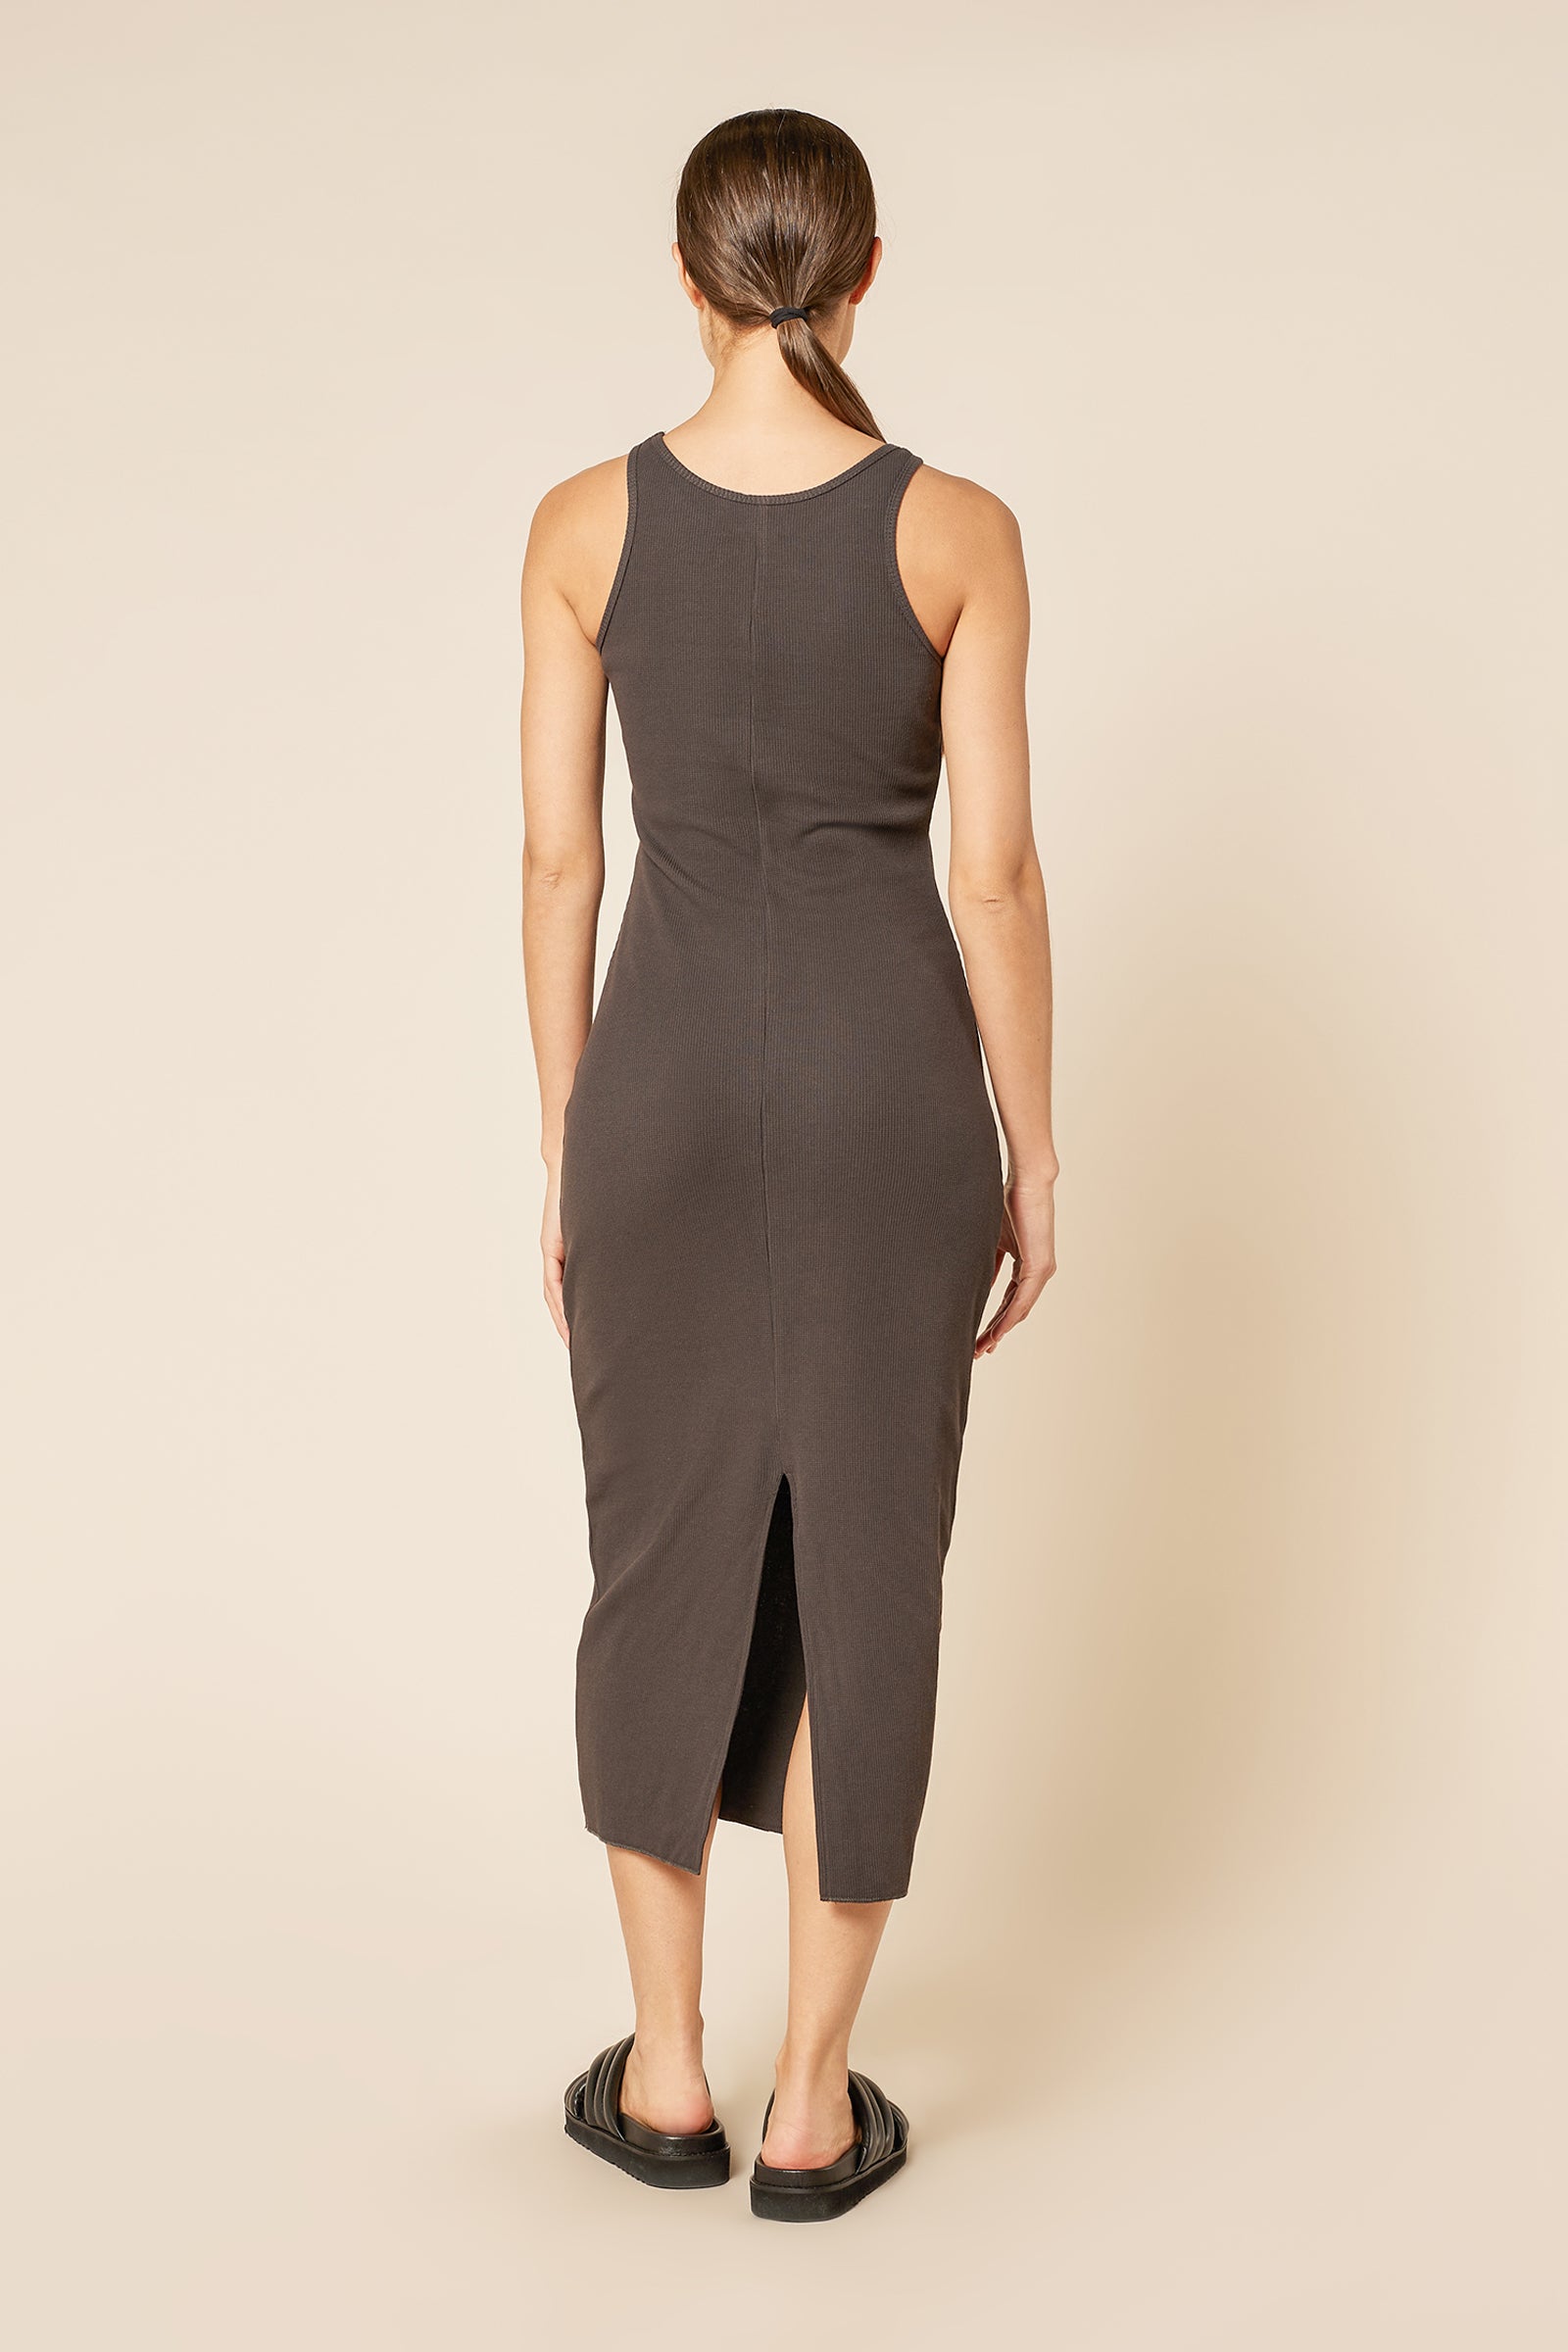 Nude Lucy Harley Waffle Dress in a Dark Grey In a Brown Coal Colour